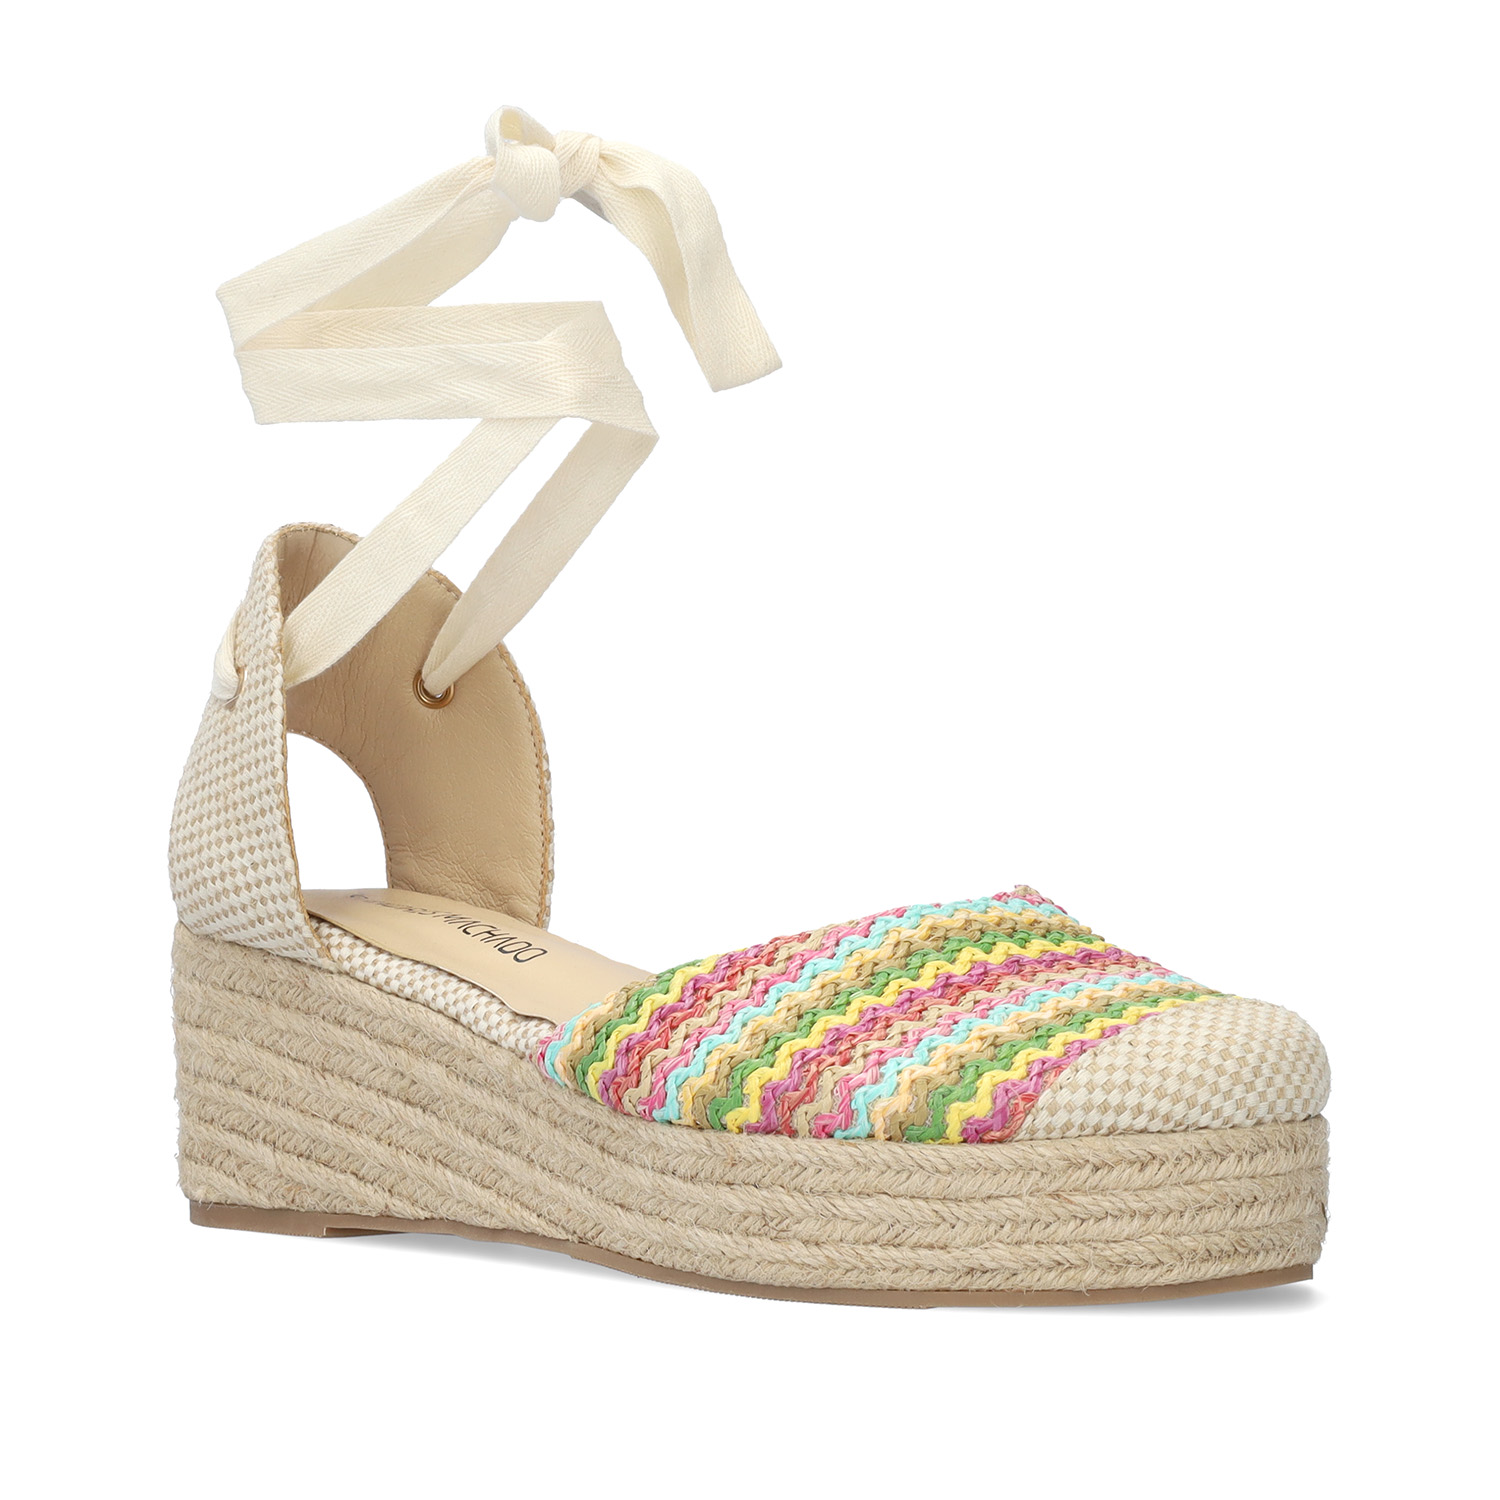 Wedge sandals in multi-colored fabric with jute wedge 